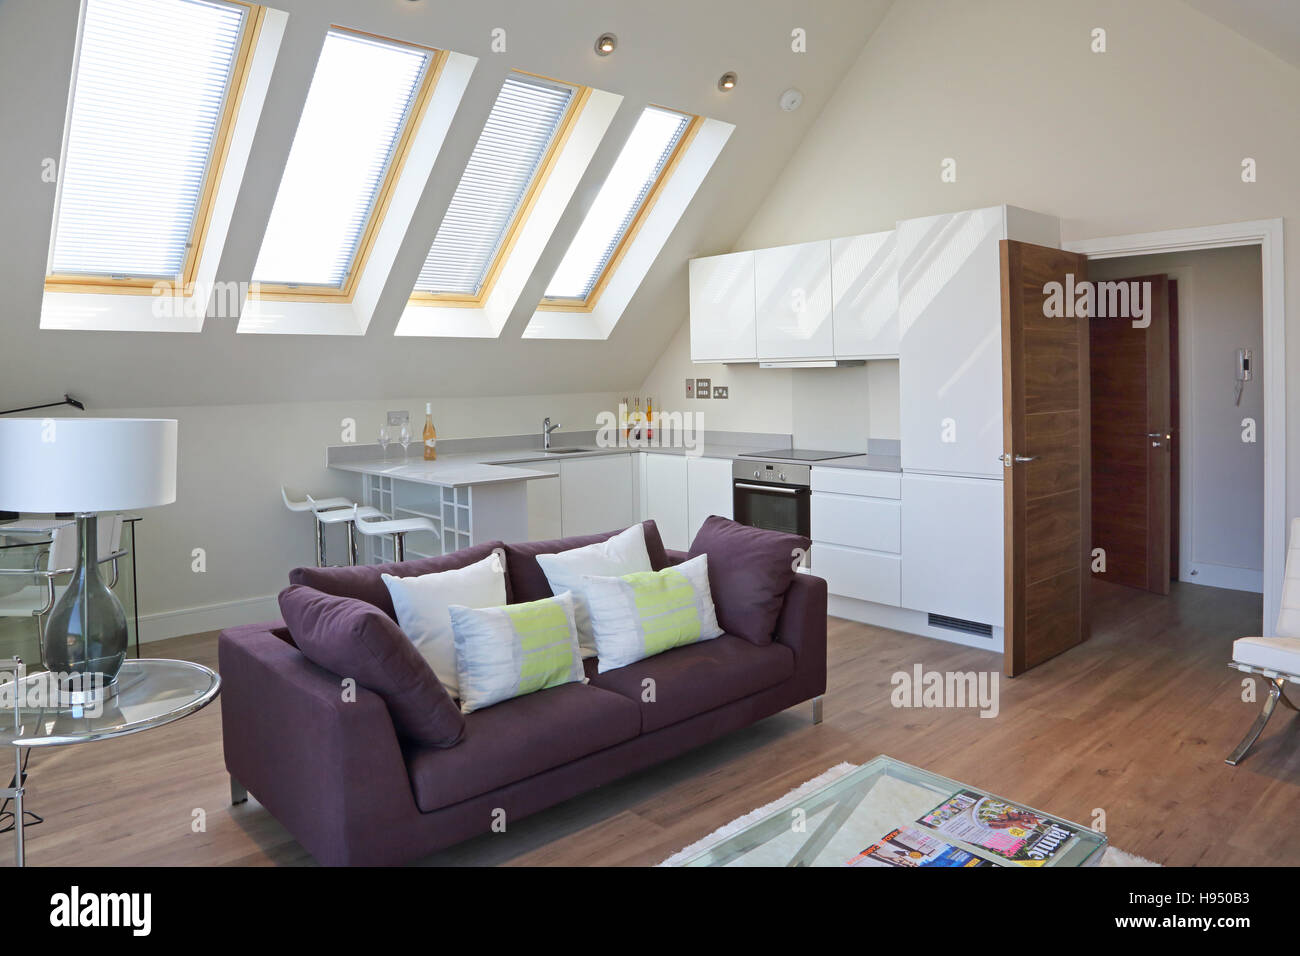 Interior of a modern attic apartment in a new super-insulated residential block. Shows living area and kitchen breakfast bar Stock Photo